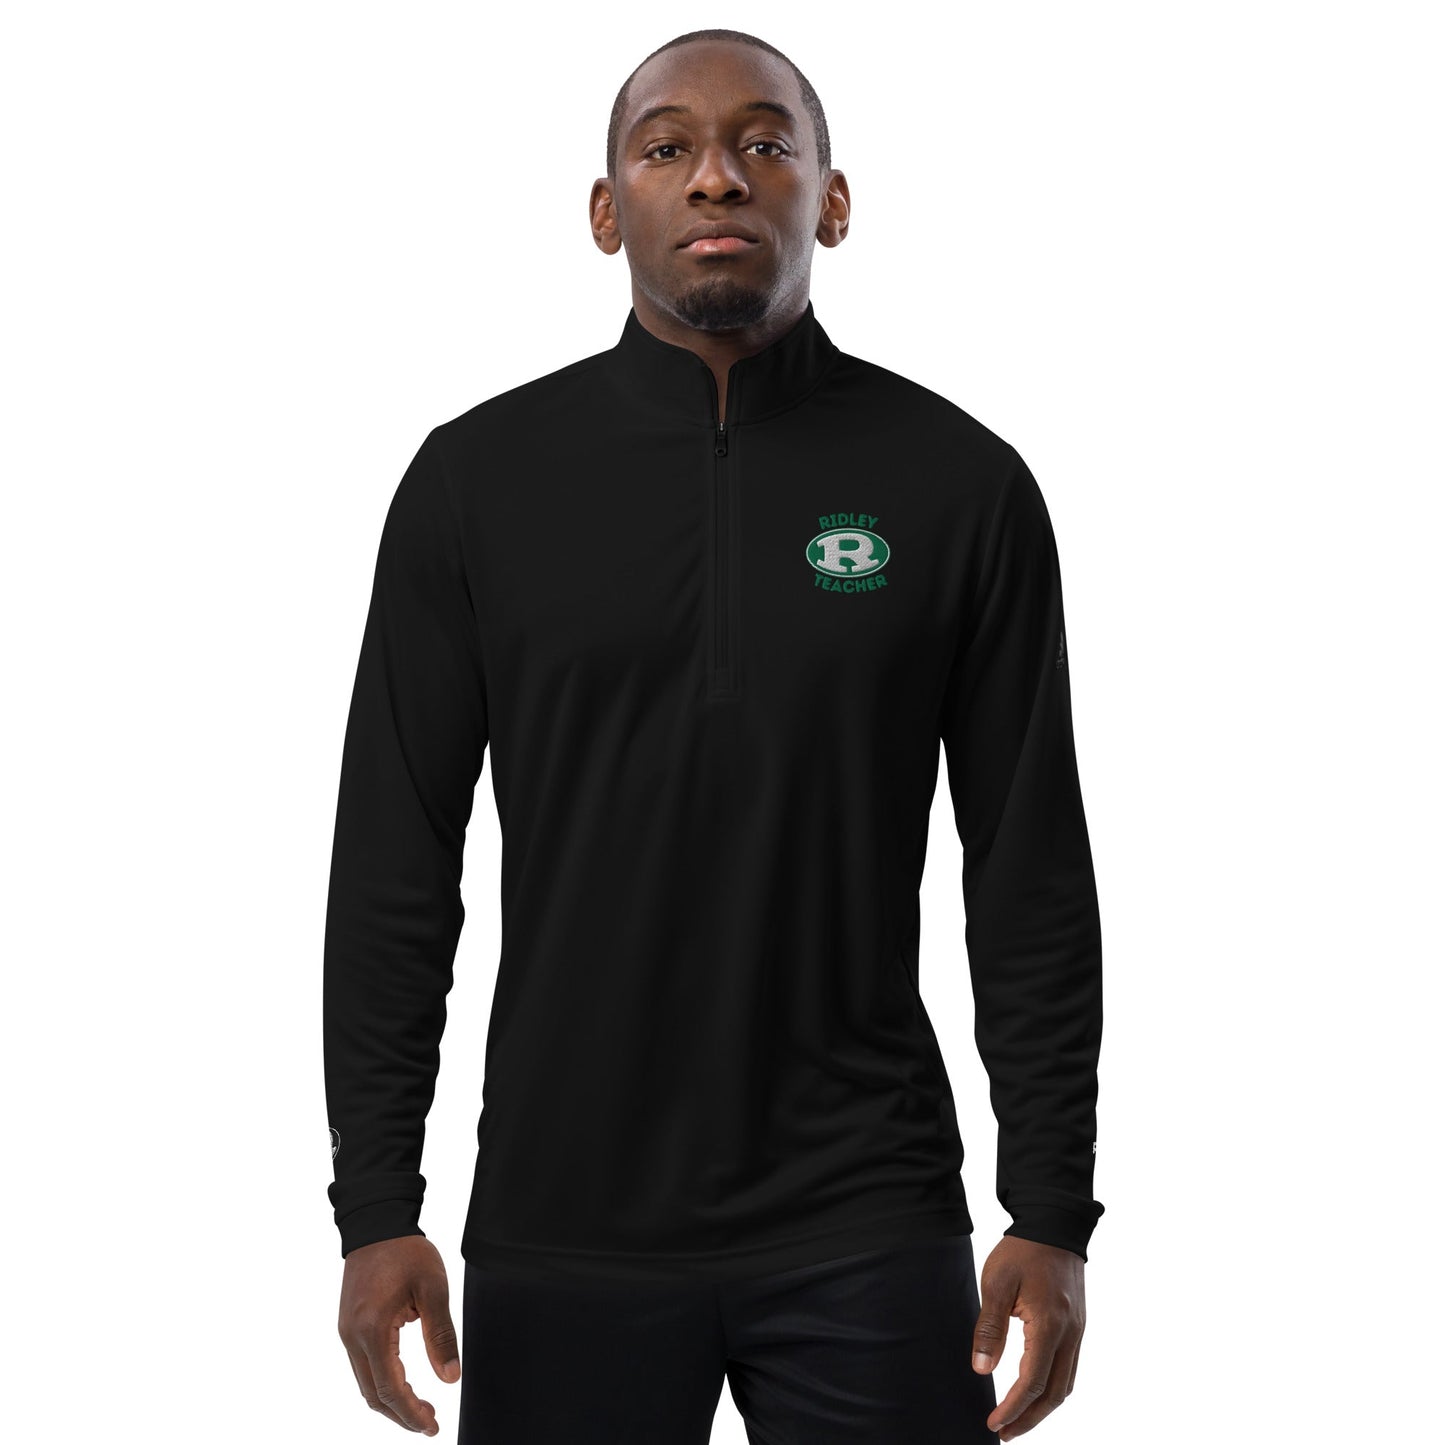 Ridley Teacher- Adidas Quarter zip pullover- Embroidered Chest and Arms